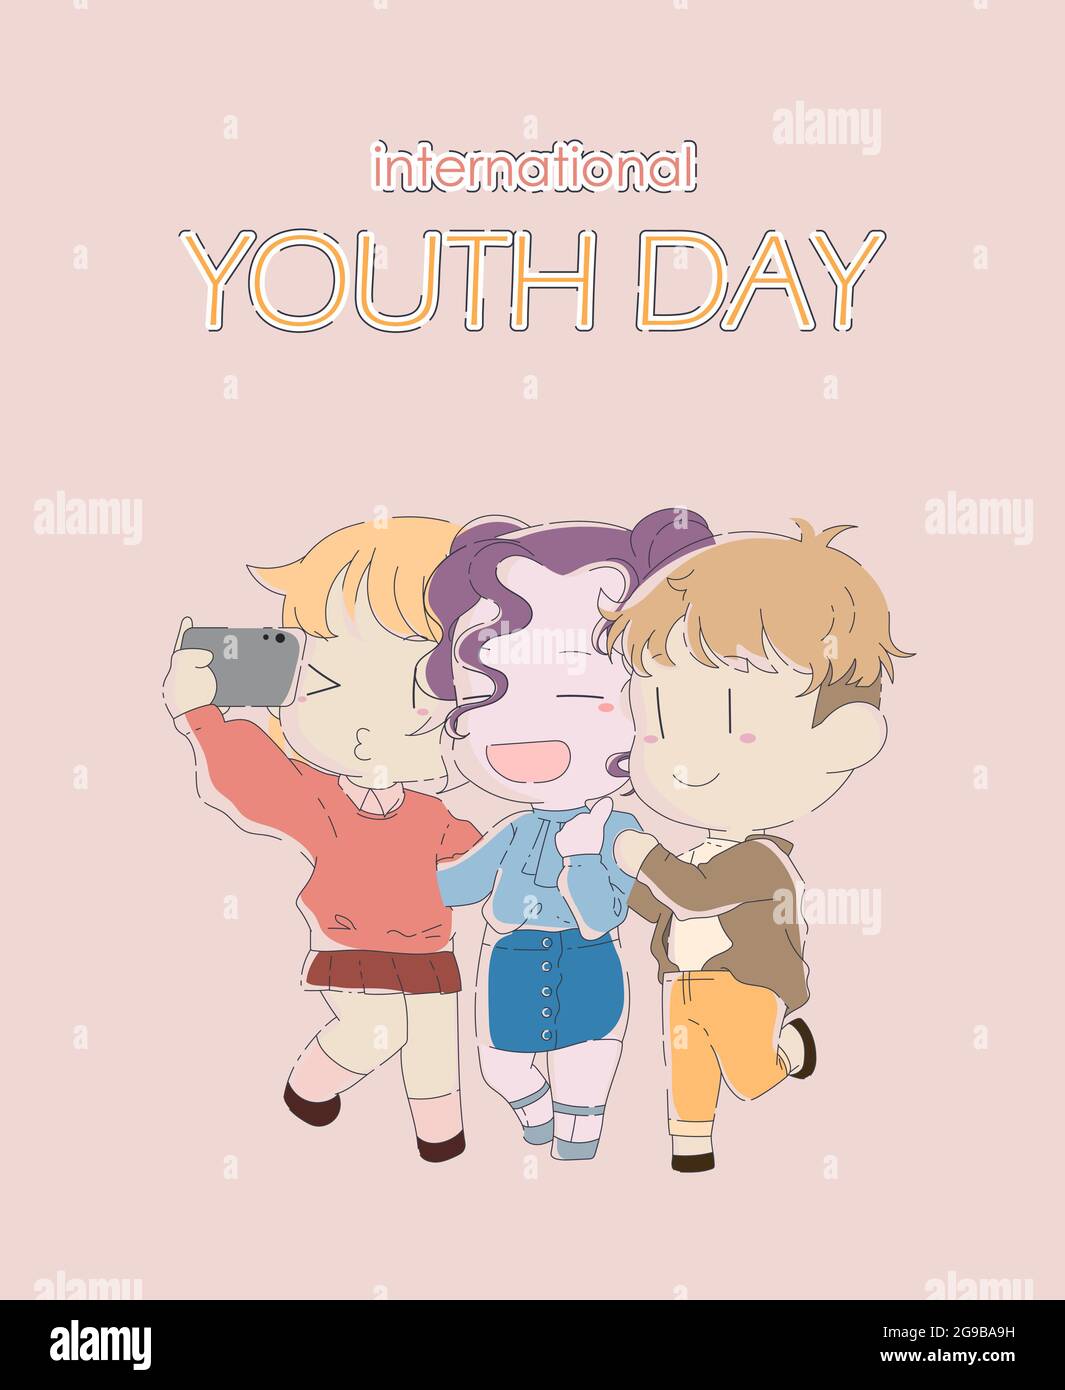 International Youth Day. Doodle vector illustration. Illustration in a flat style together for a holiday celebration. Friends take a photo together. I Stock Vector